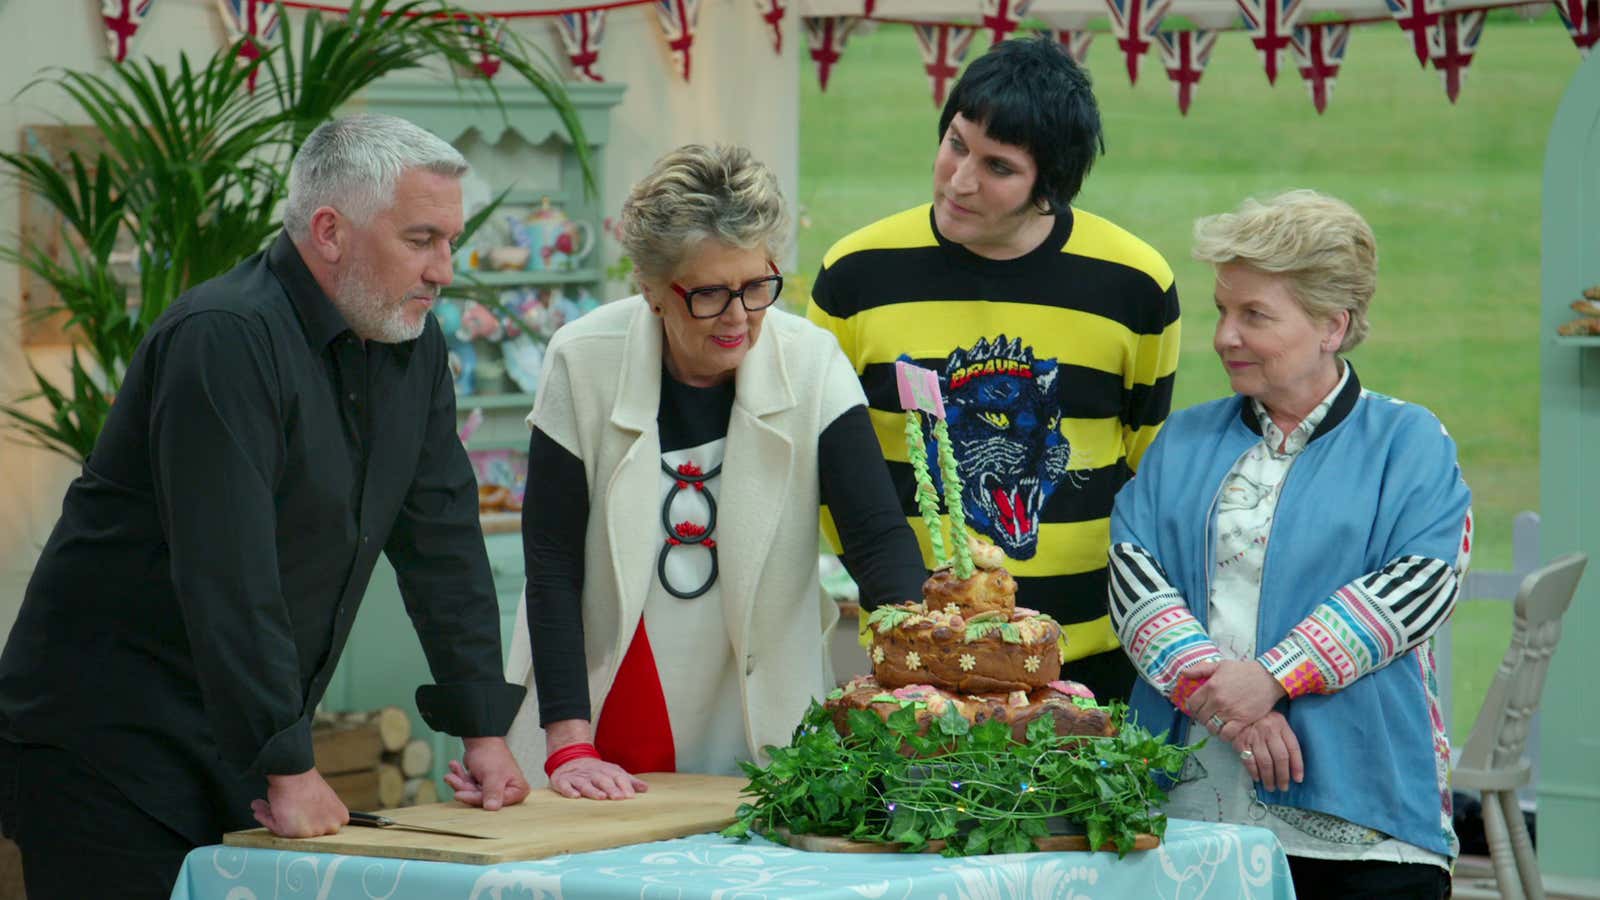 “The Great British Baking Show” is back.